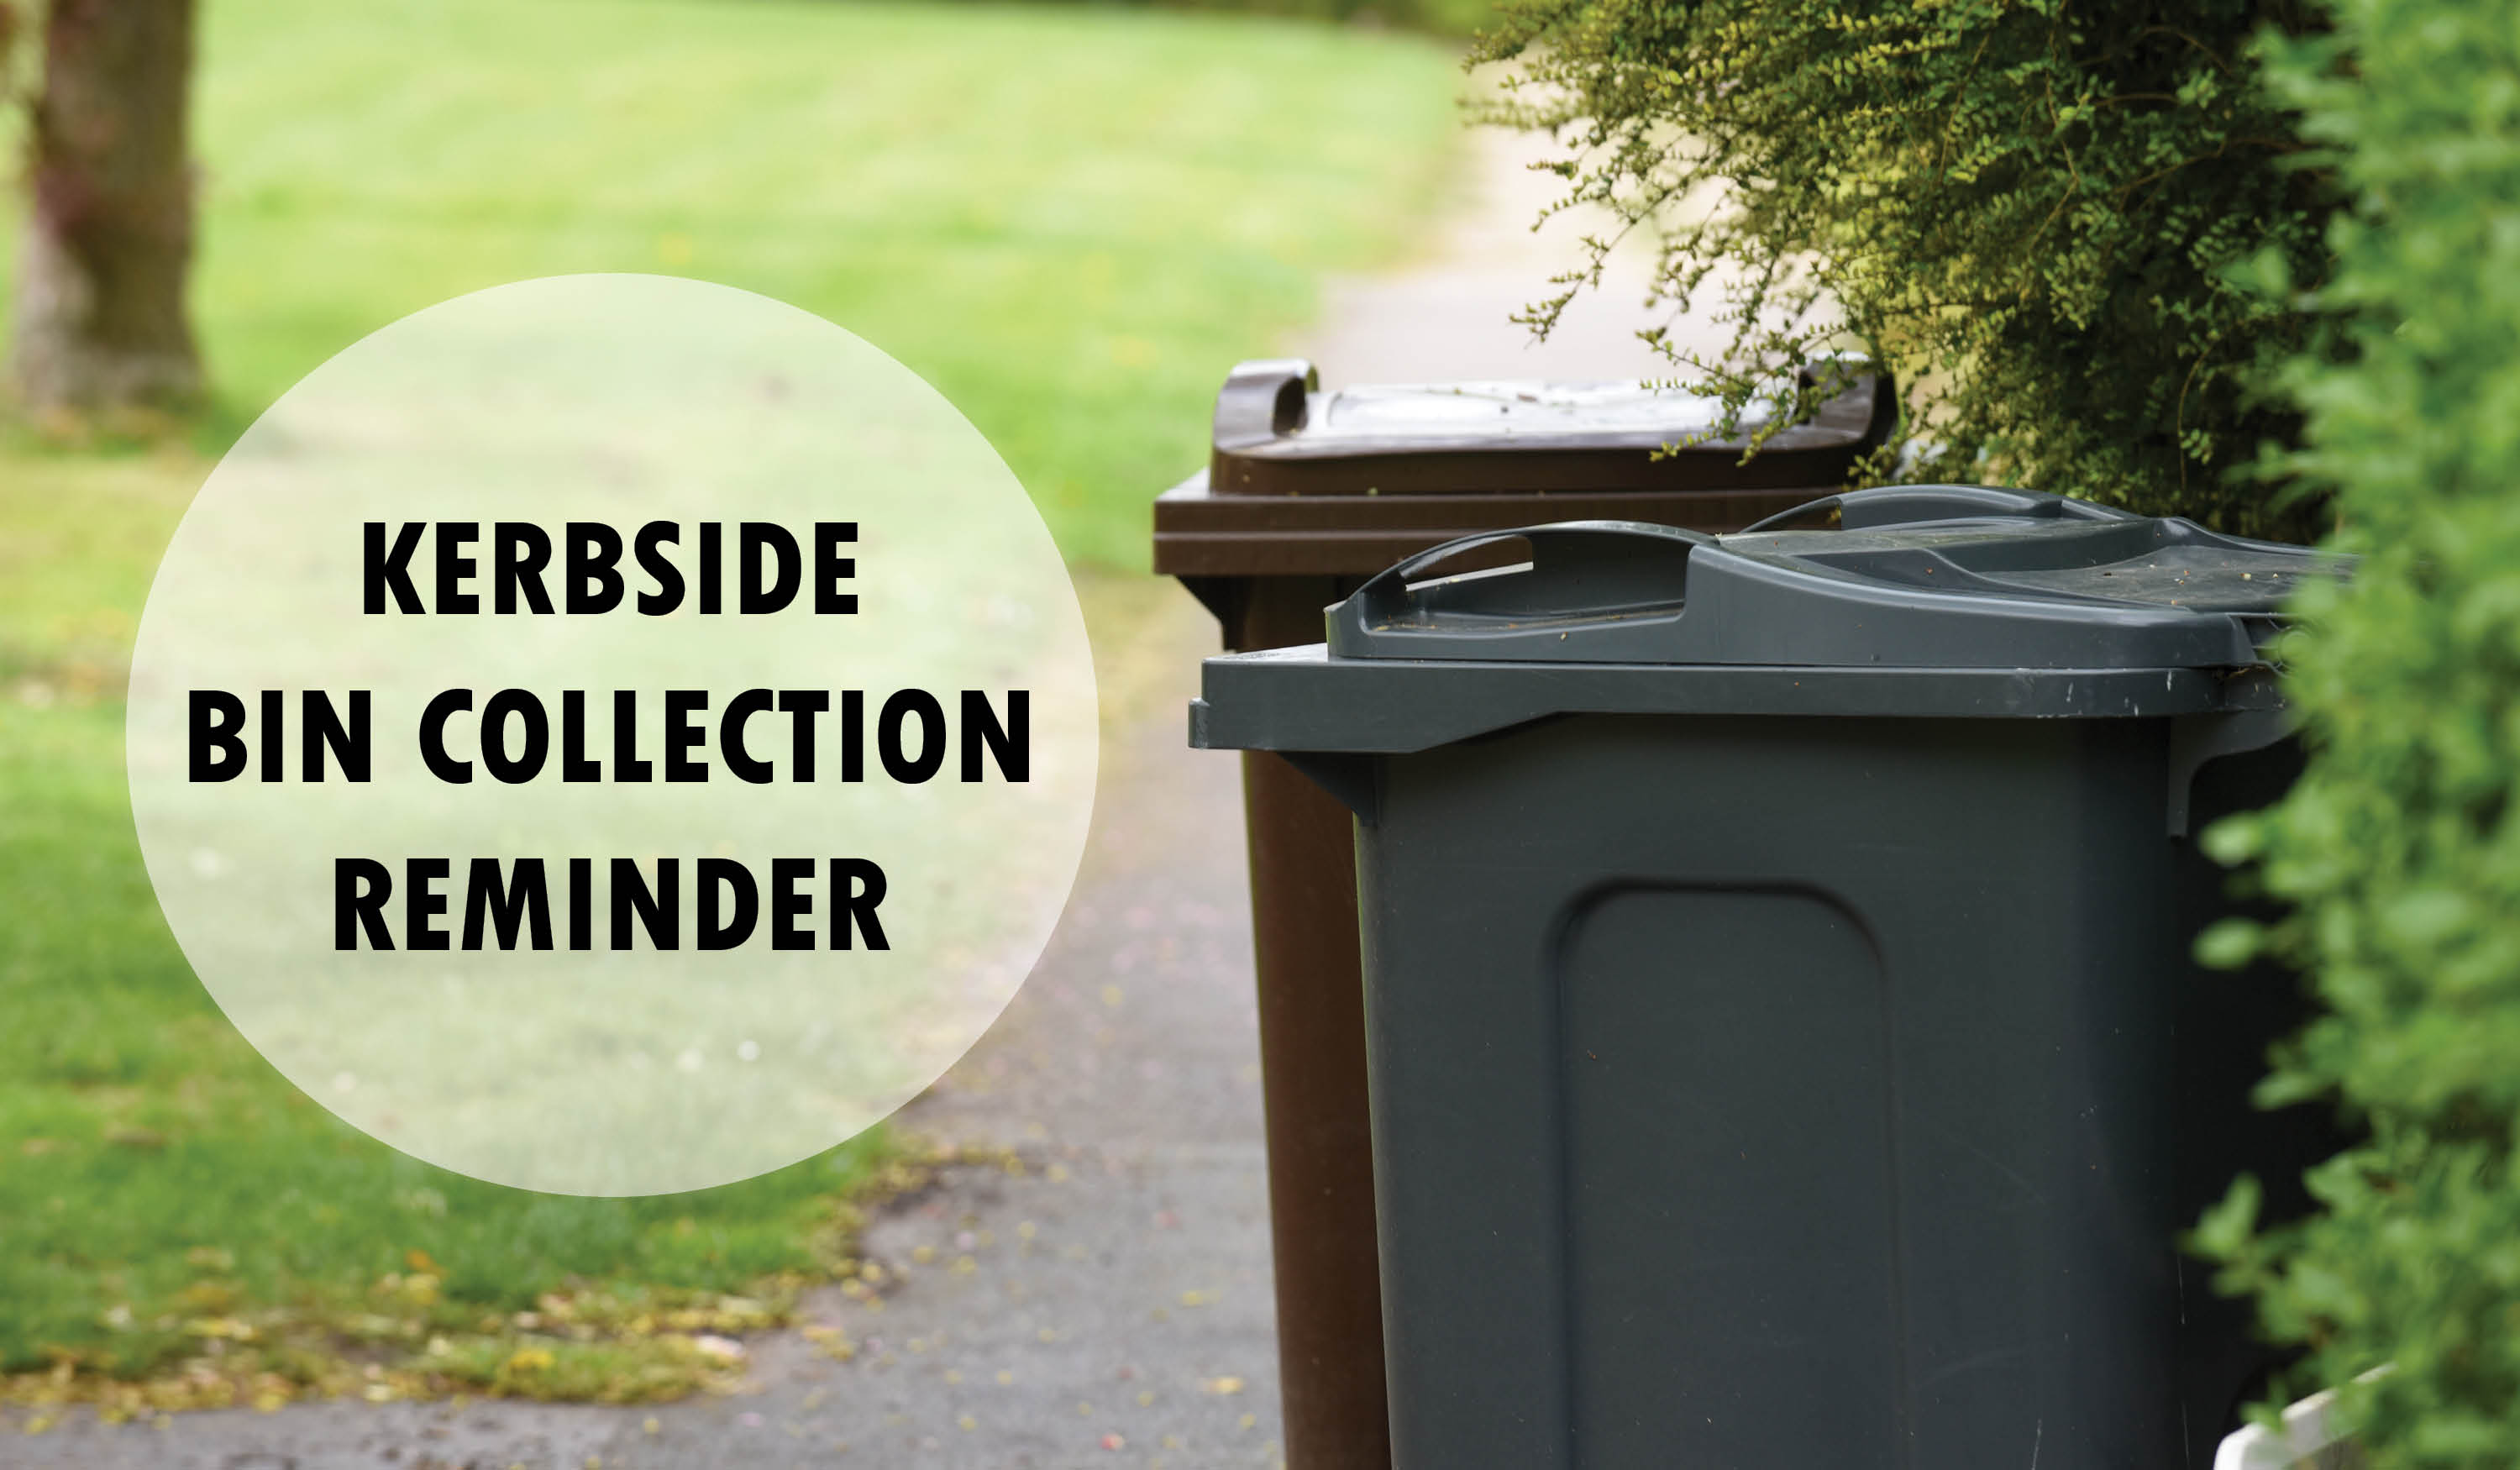 Kerbside collection 1 news 720x420